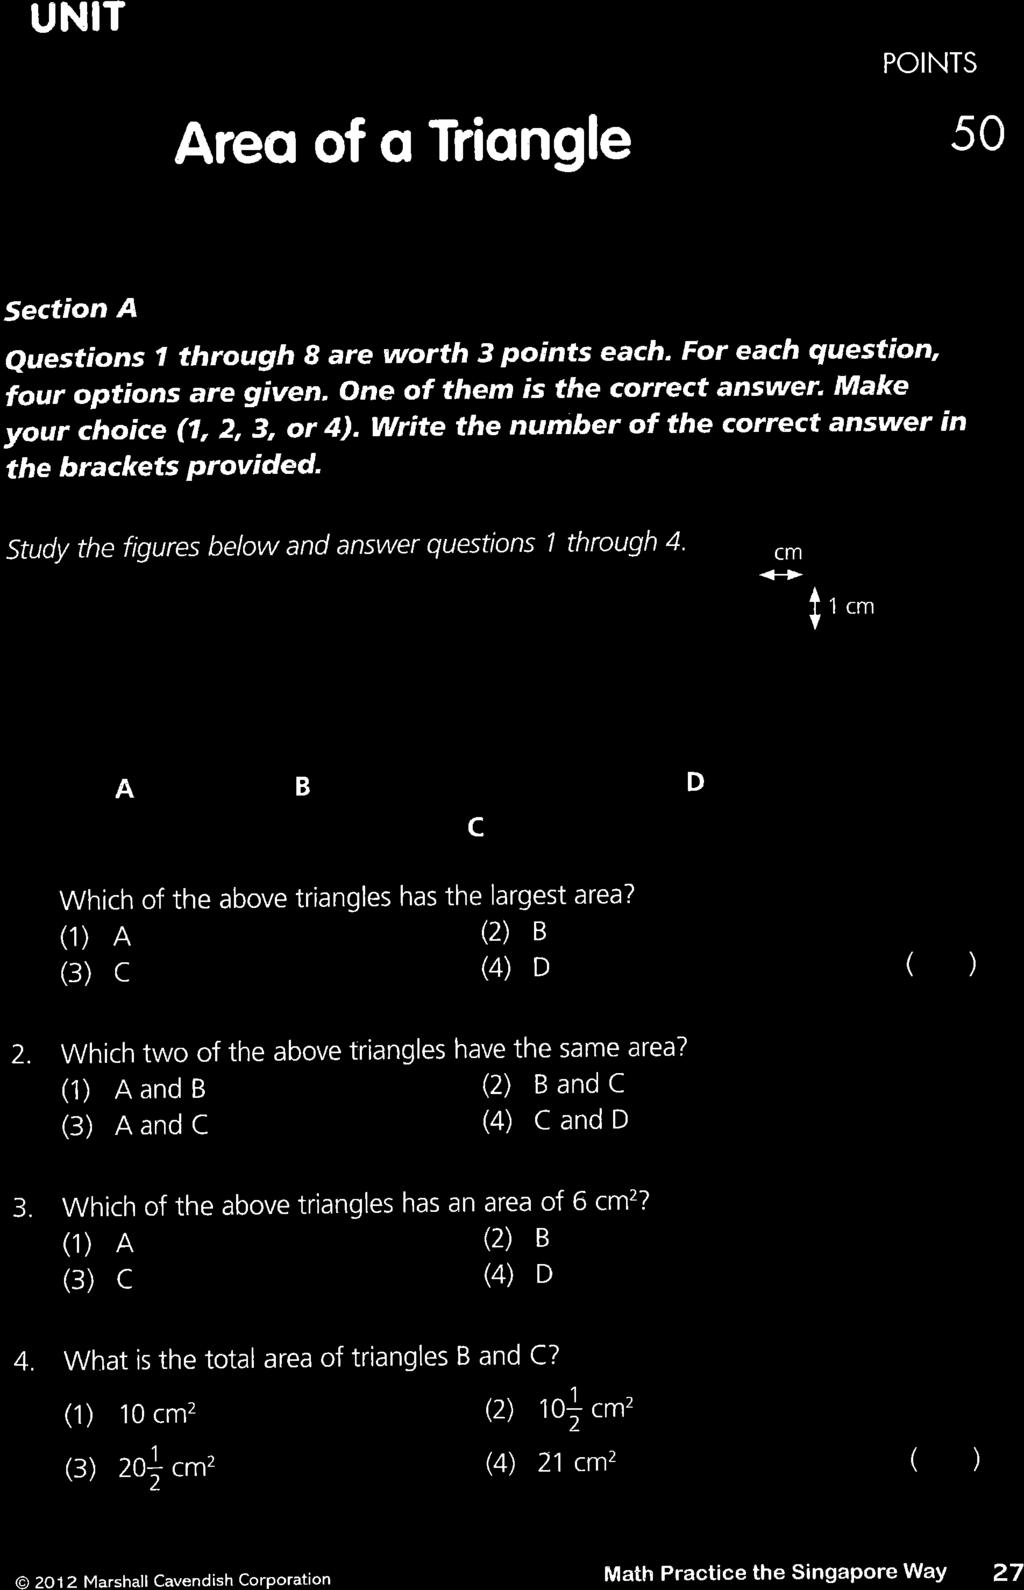 UNIT Areq of o Triongle POINTS 50 Section A Questions 7 through I are worth 3 points each. Far each question, four options are given, One of them is the correct answer.